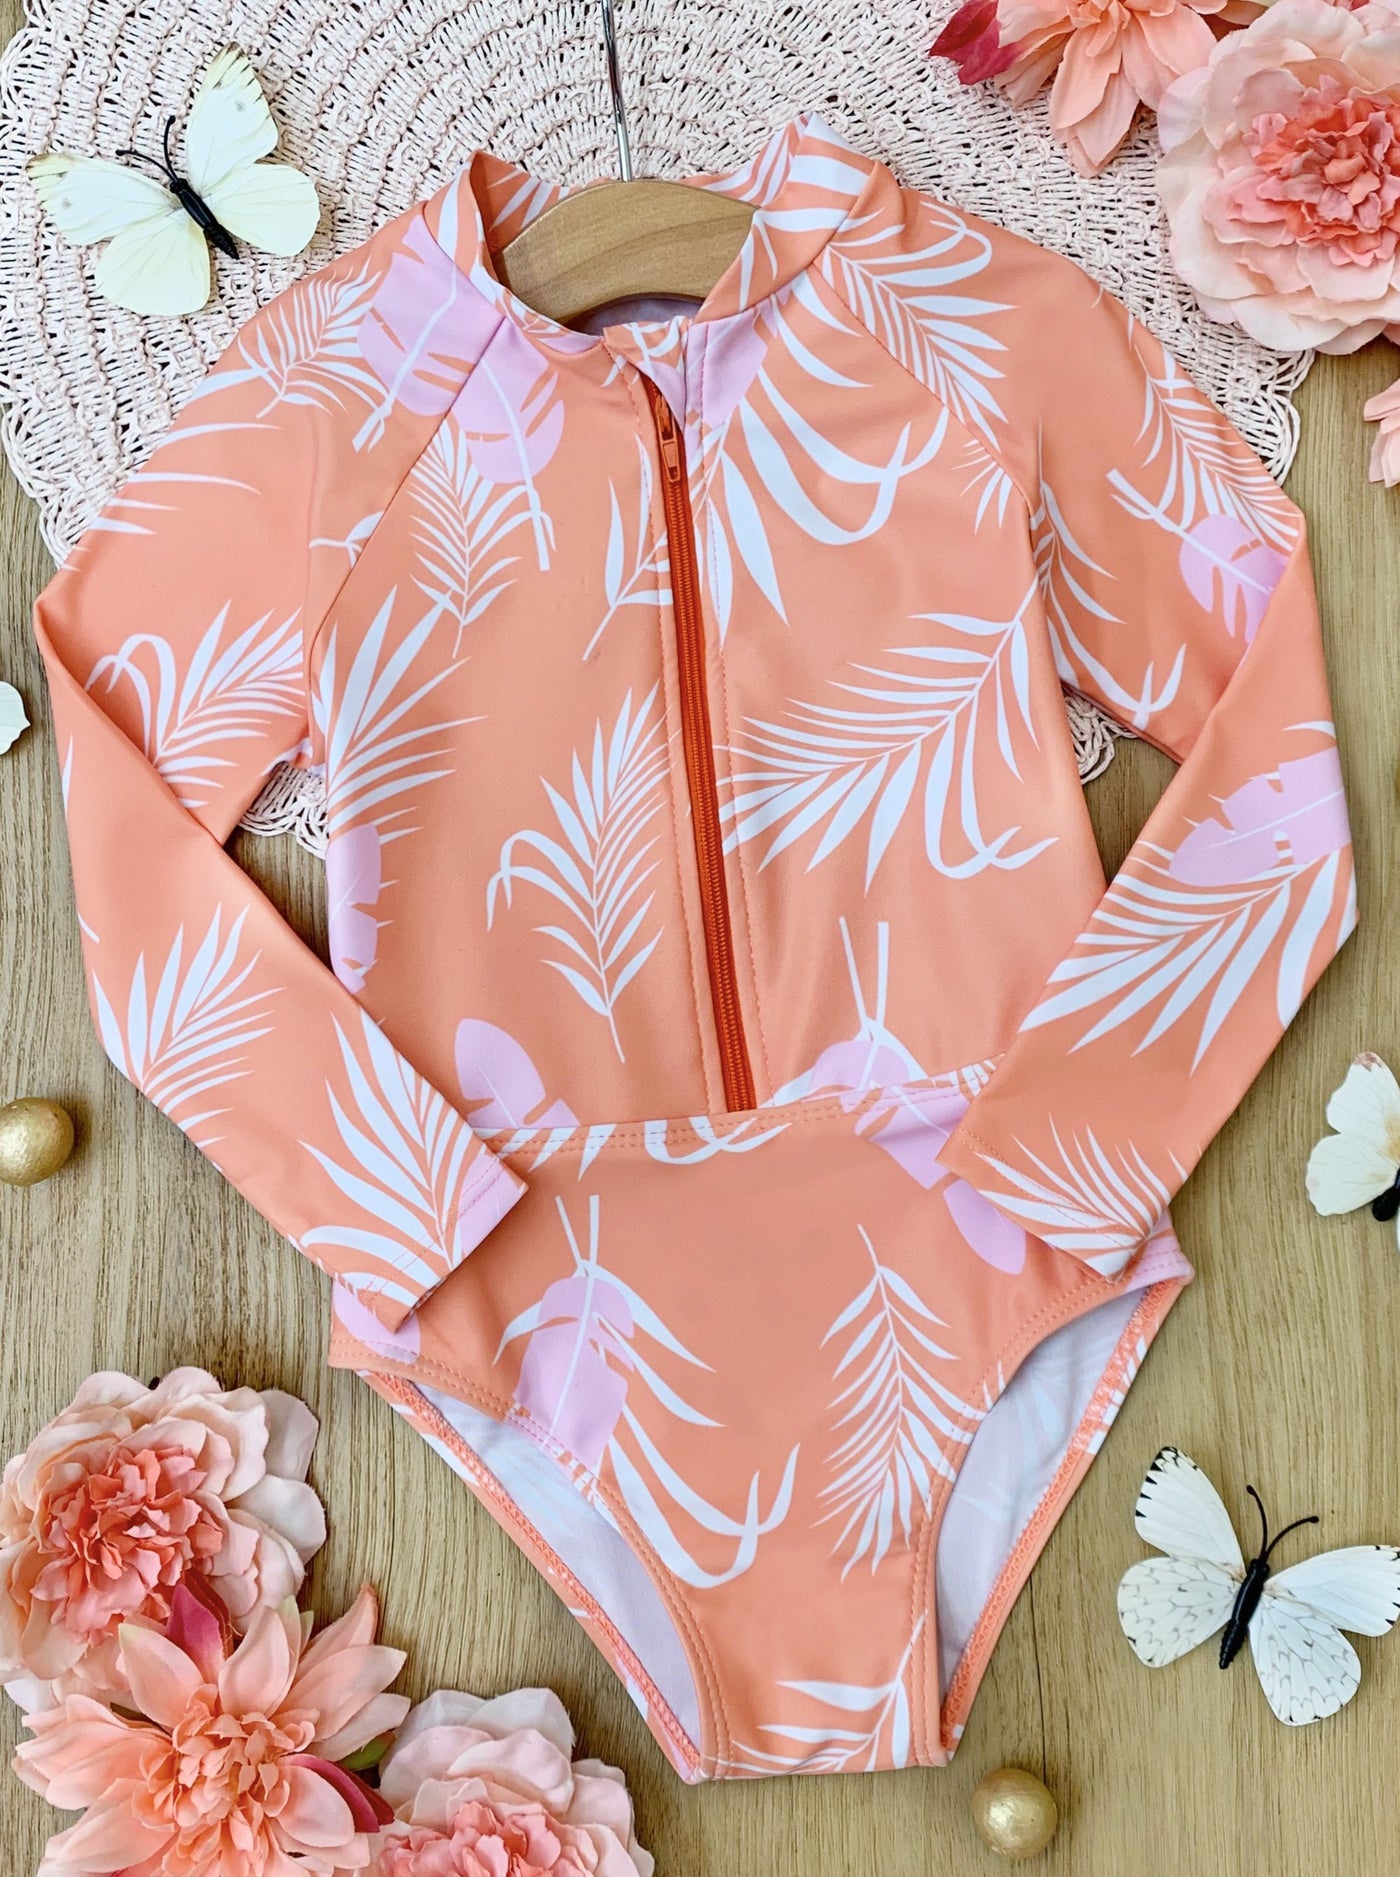 Toddler Rash Guard Swimsuit | Girls Tropical Print One Piece Swimsuit